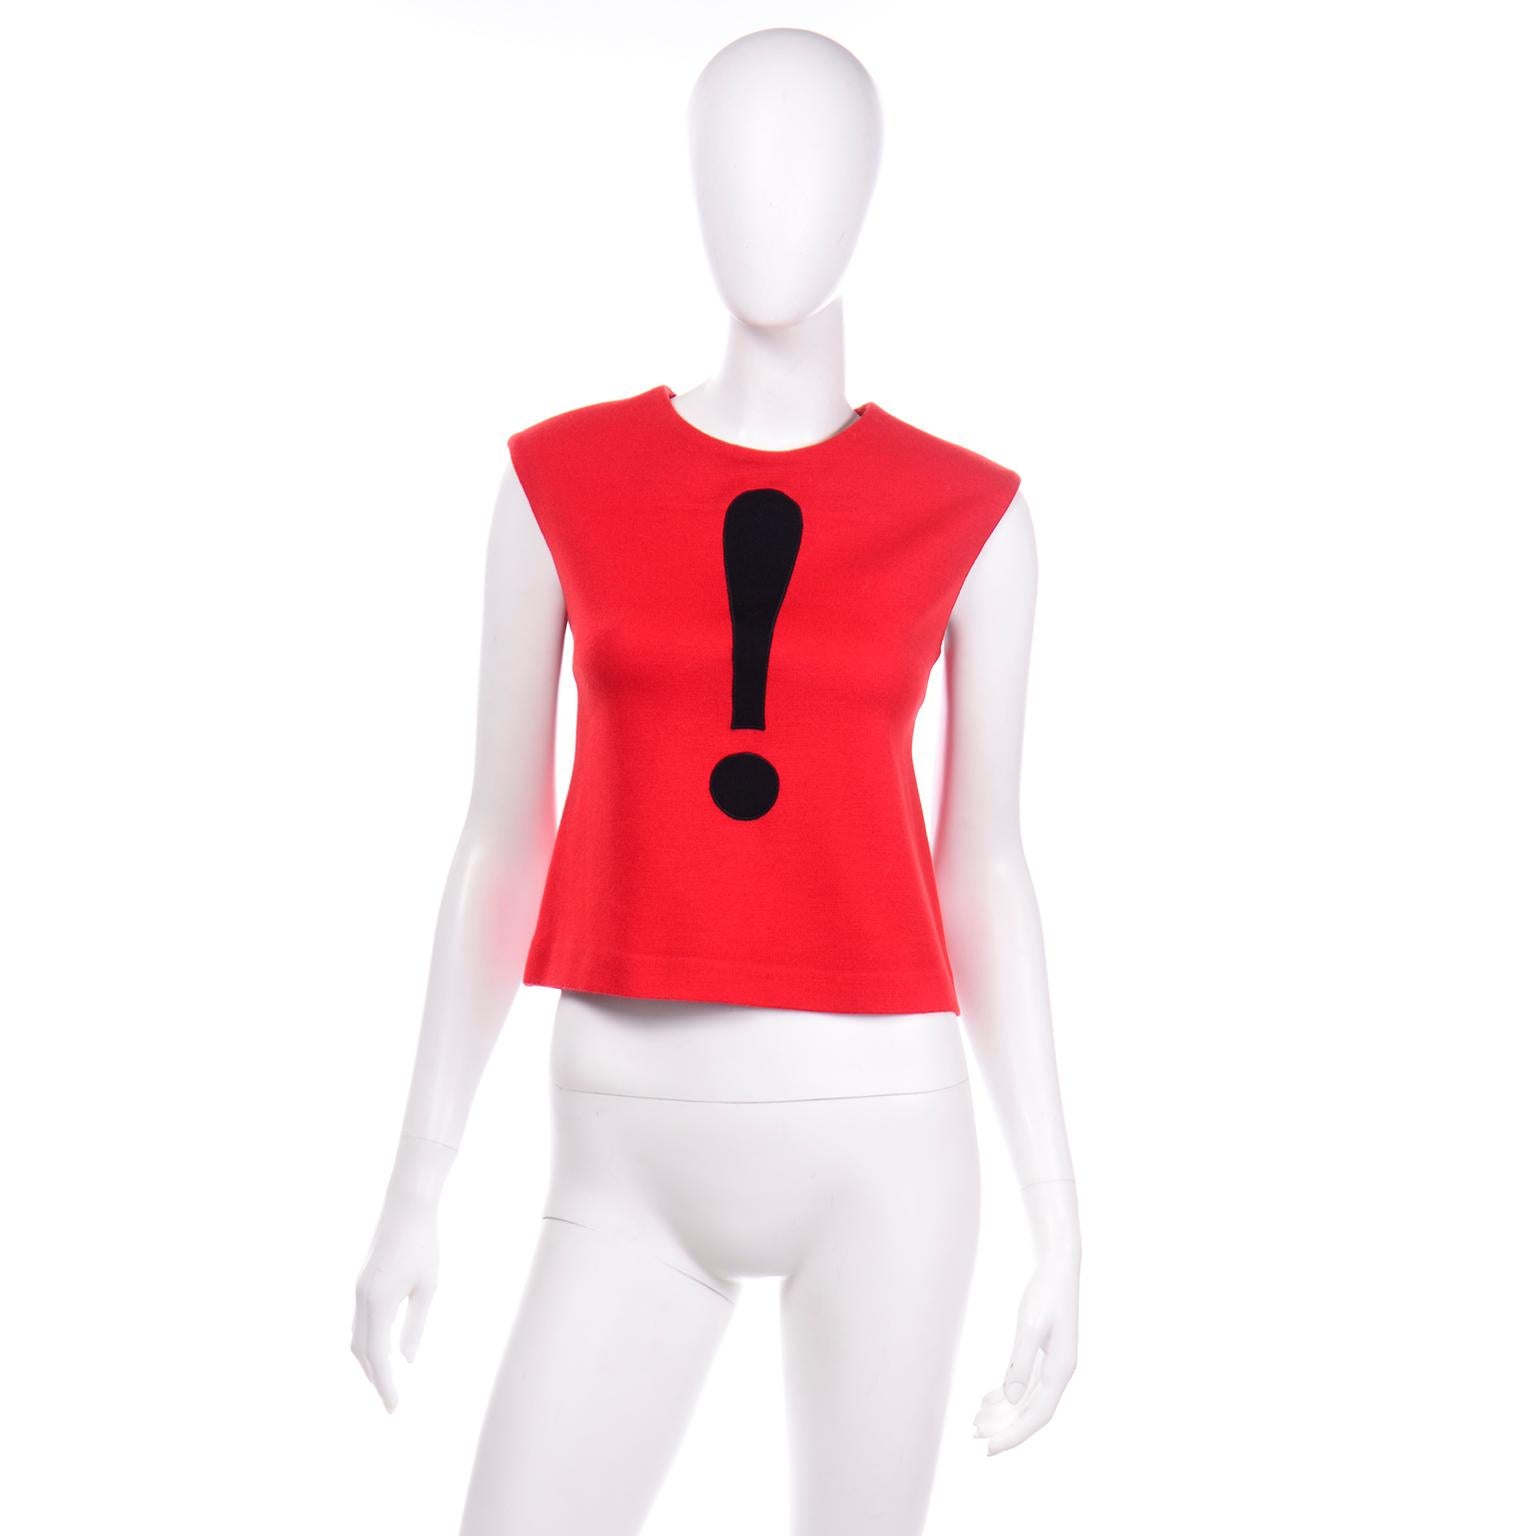 This iconic Cheap and Chic by Moschino red and black exclamation point sleeveless top is a great piece for any collector or Moschino lover. This vintage top has fabric covered buttons down the center back (and has an extra button). It has a round